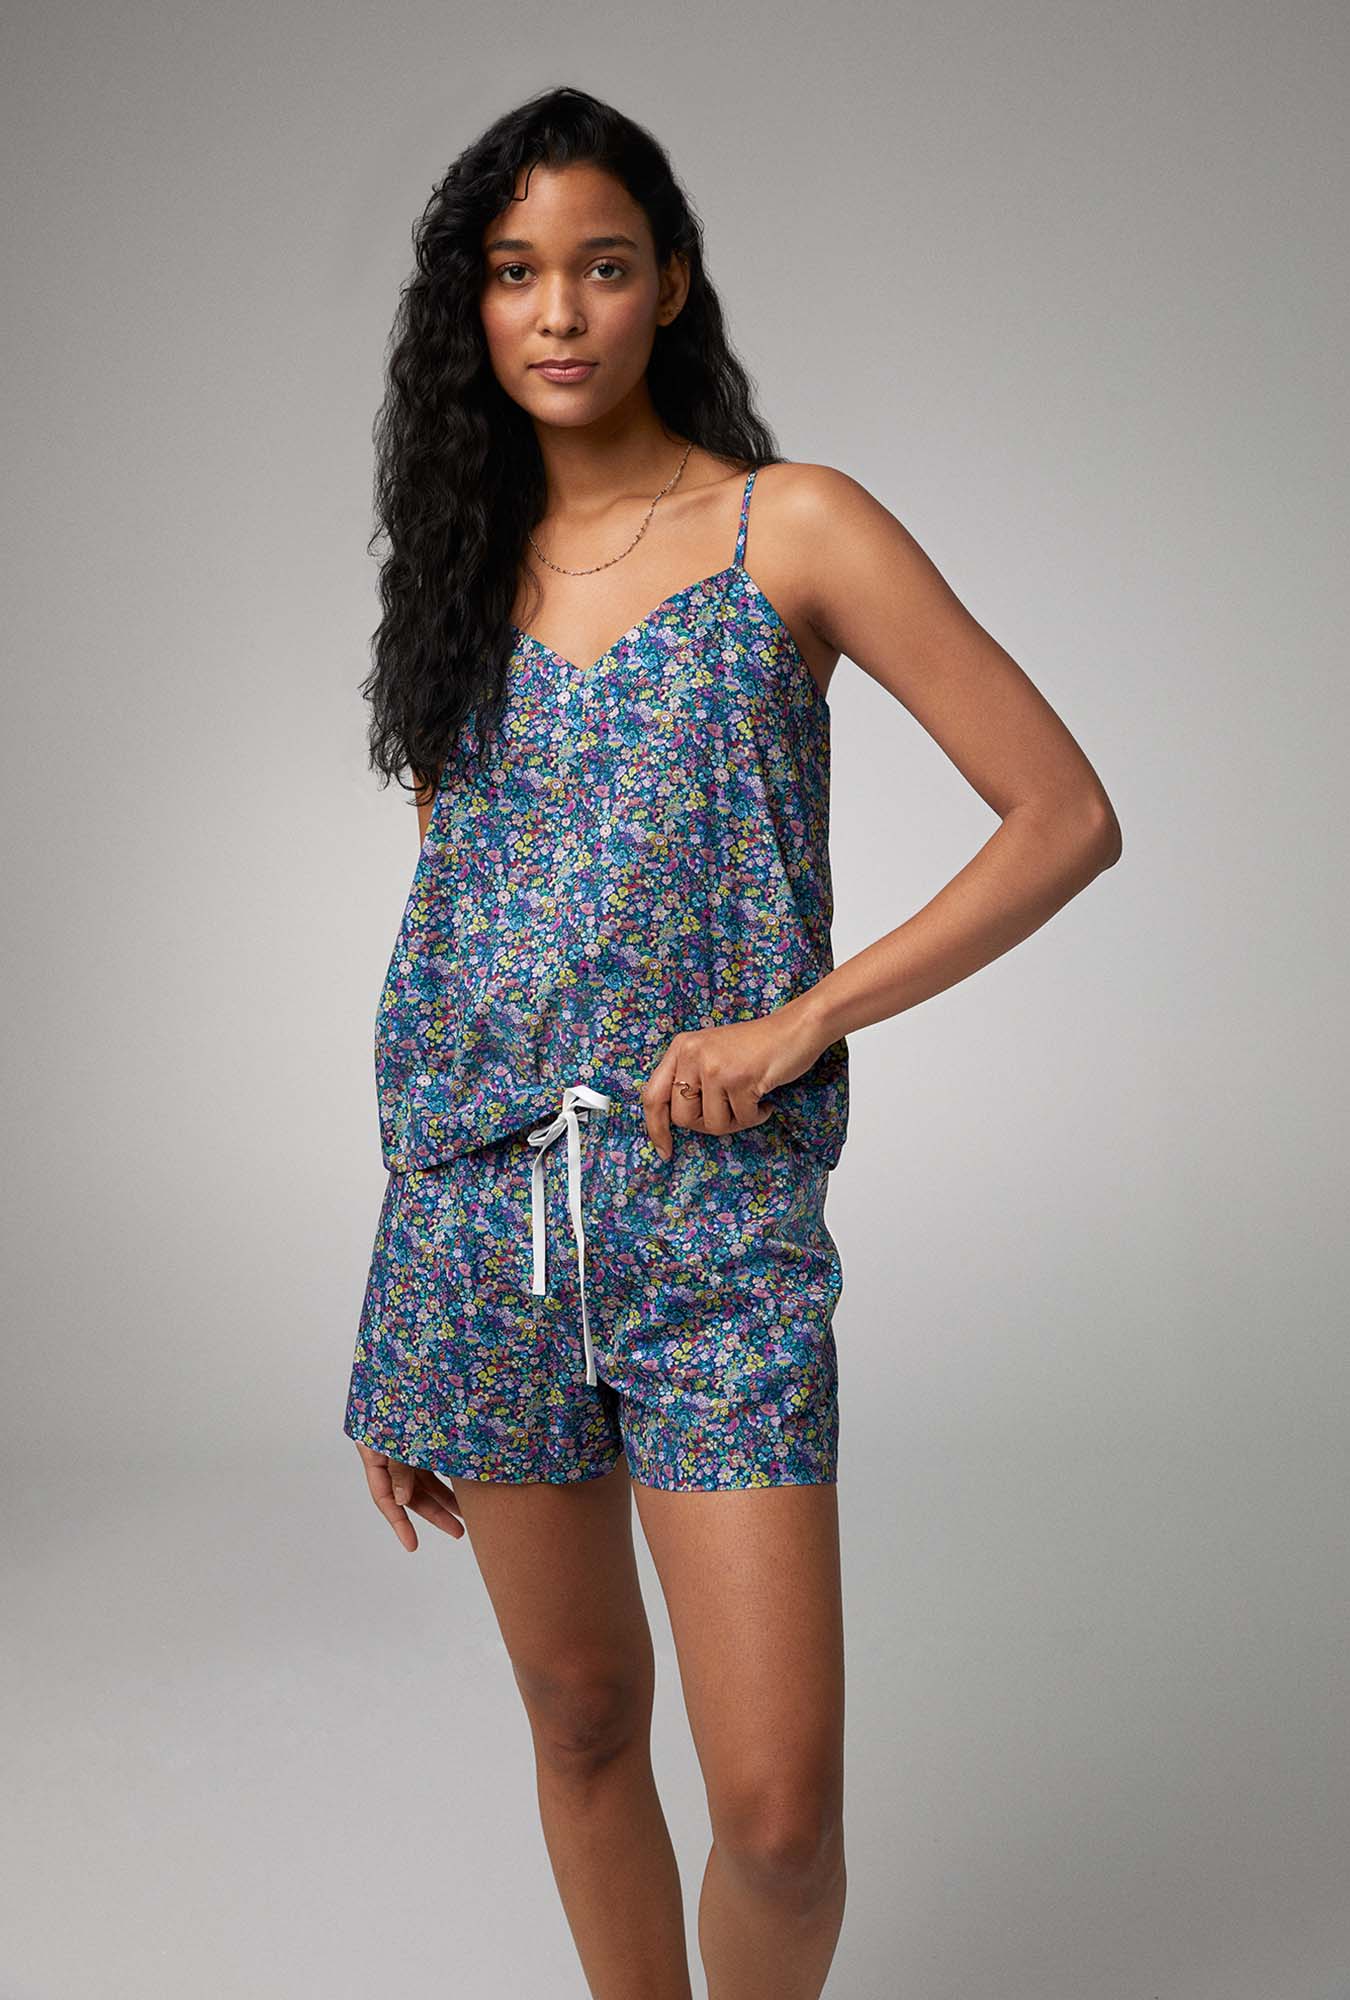 A lady wearing cami shorty pj set with classic garden print